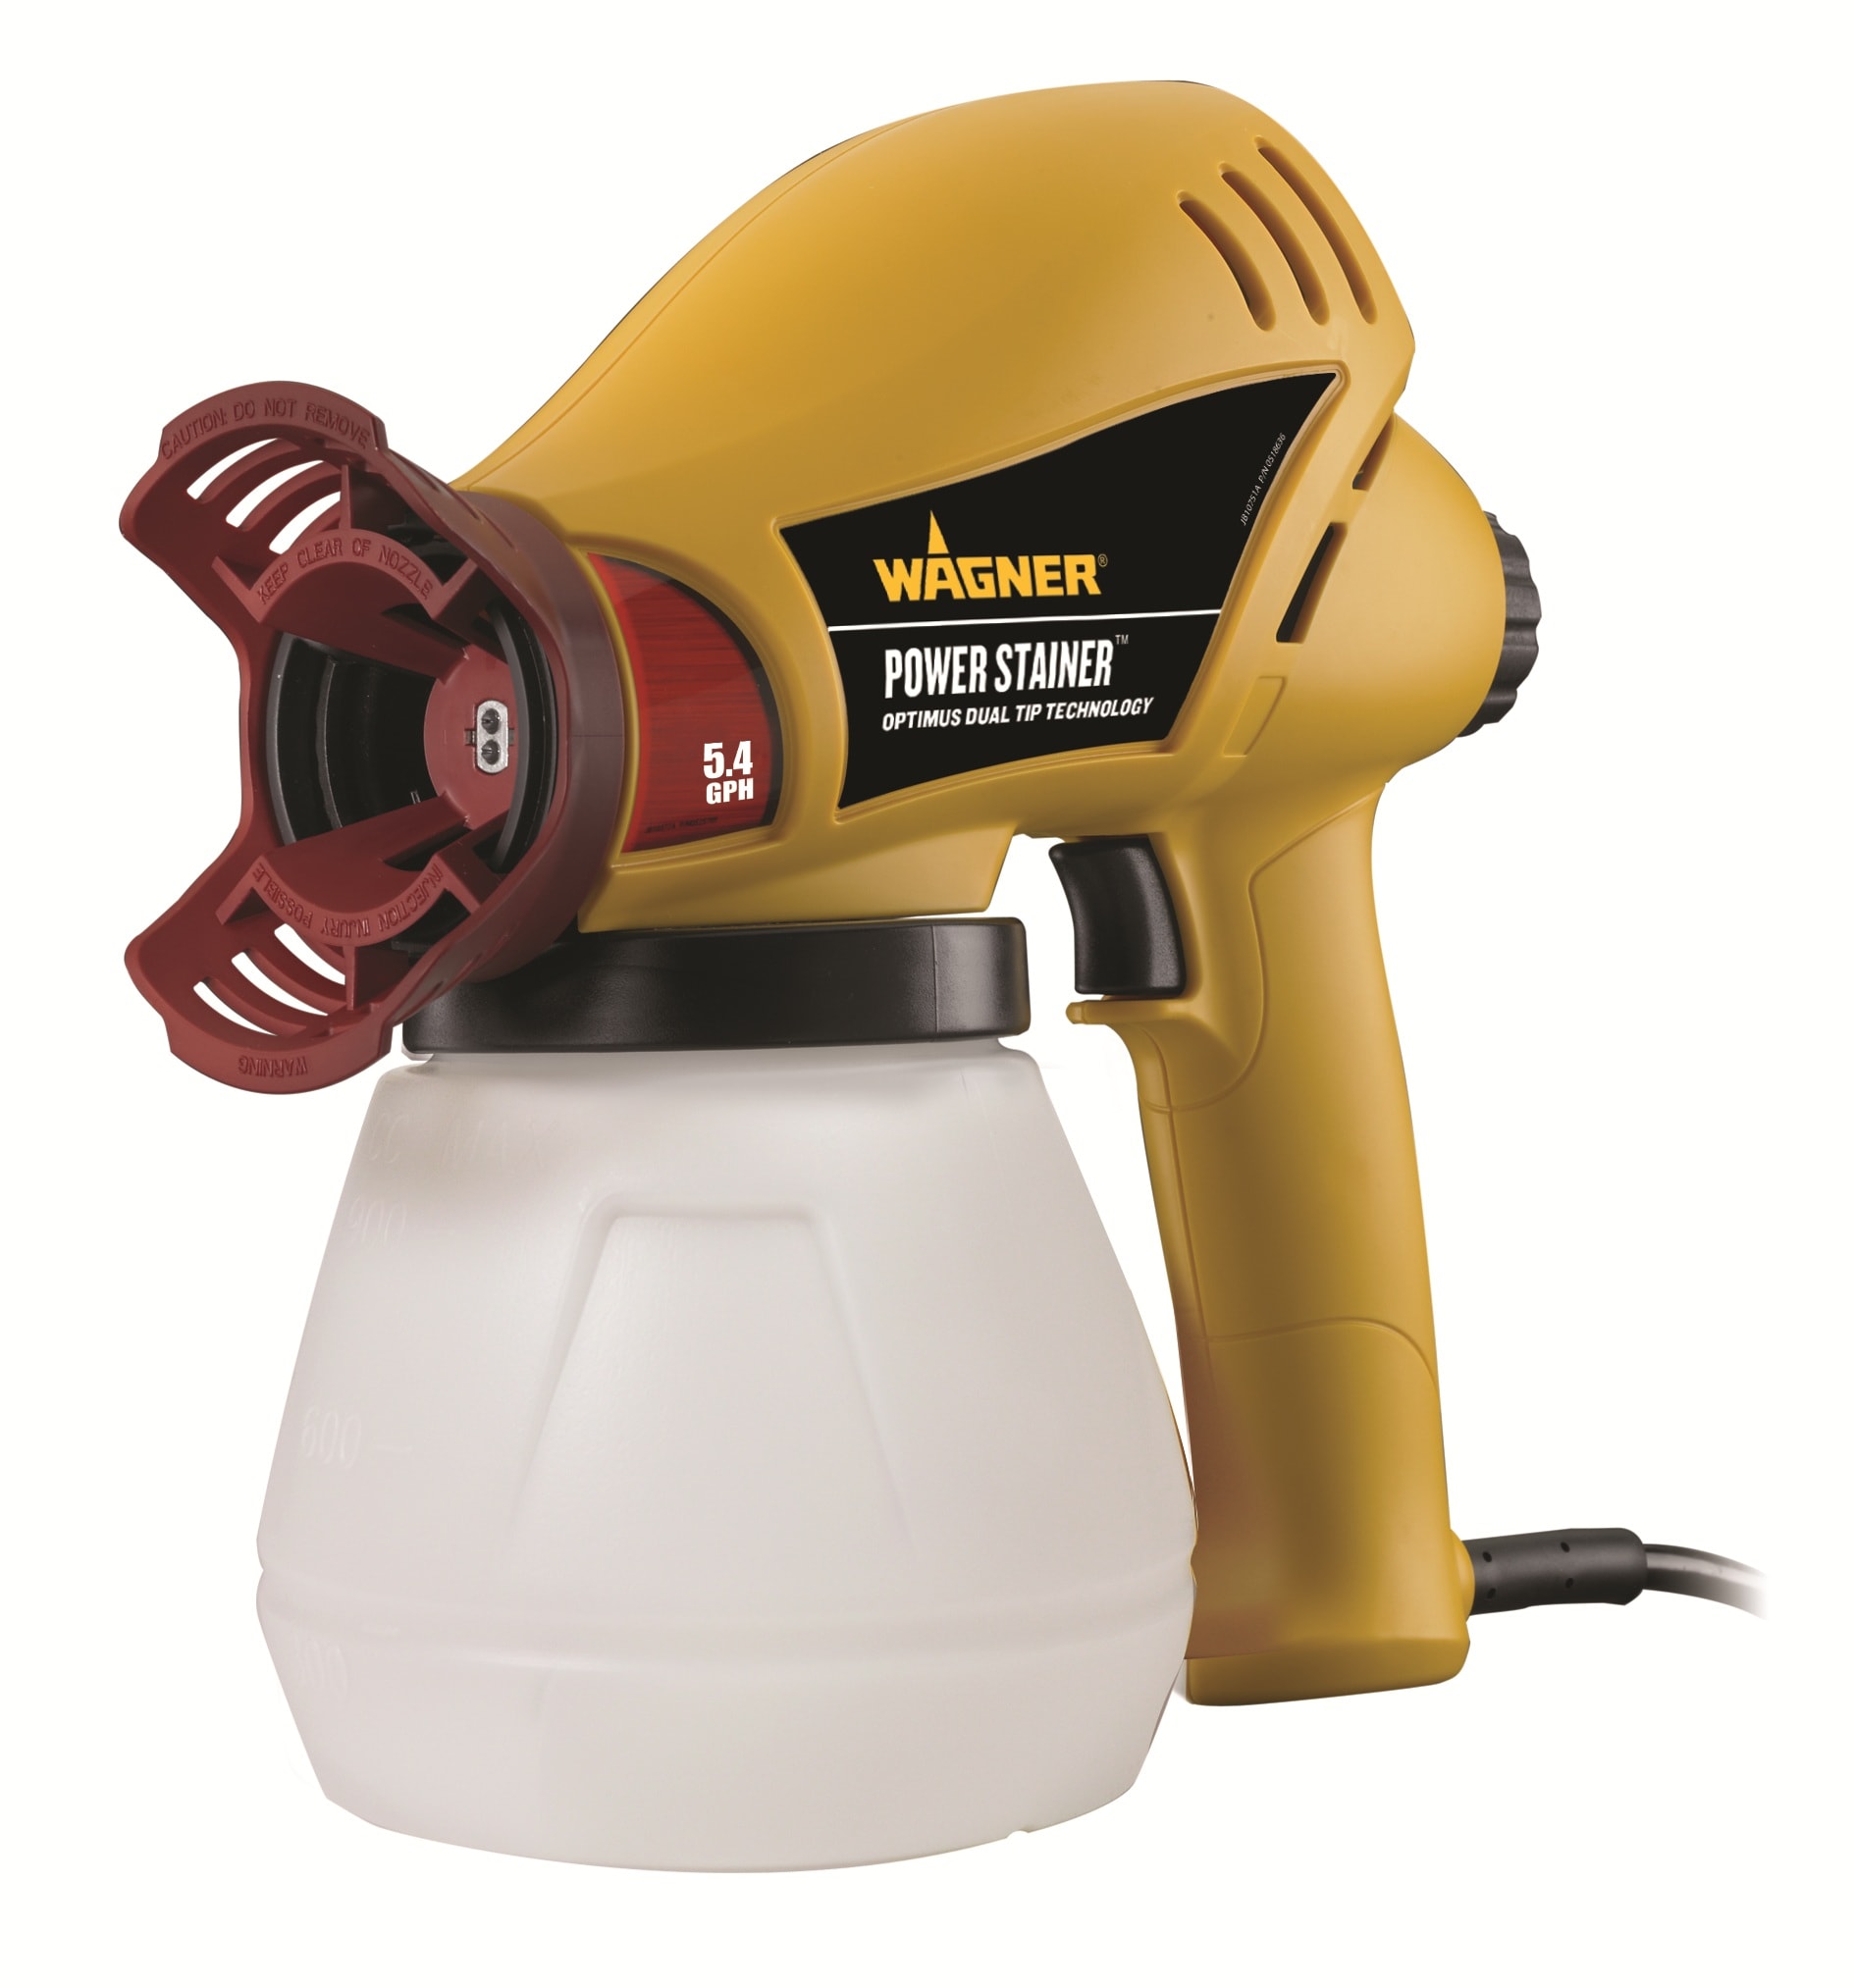 Wagner Stationary Airless Paint Sprayer at